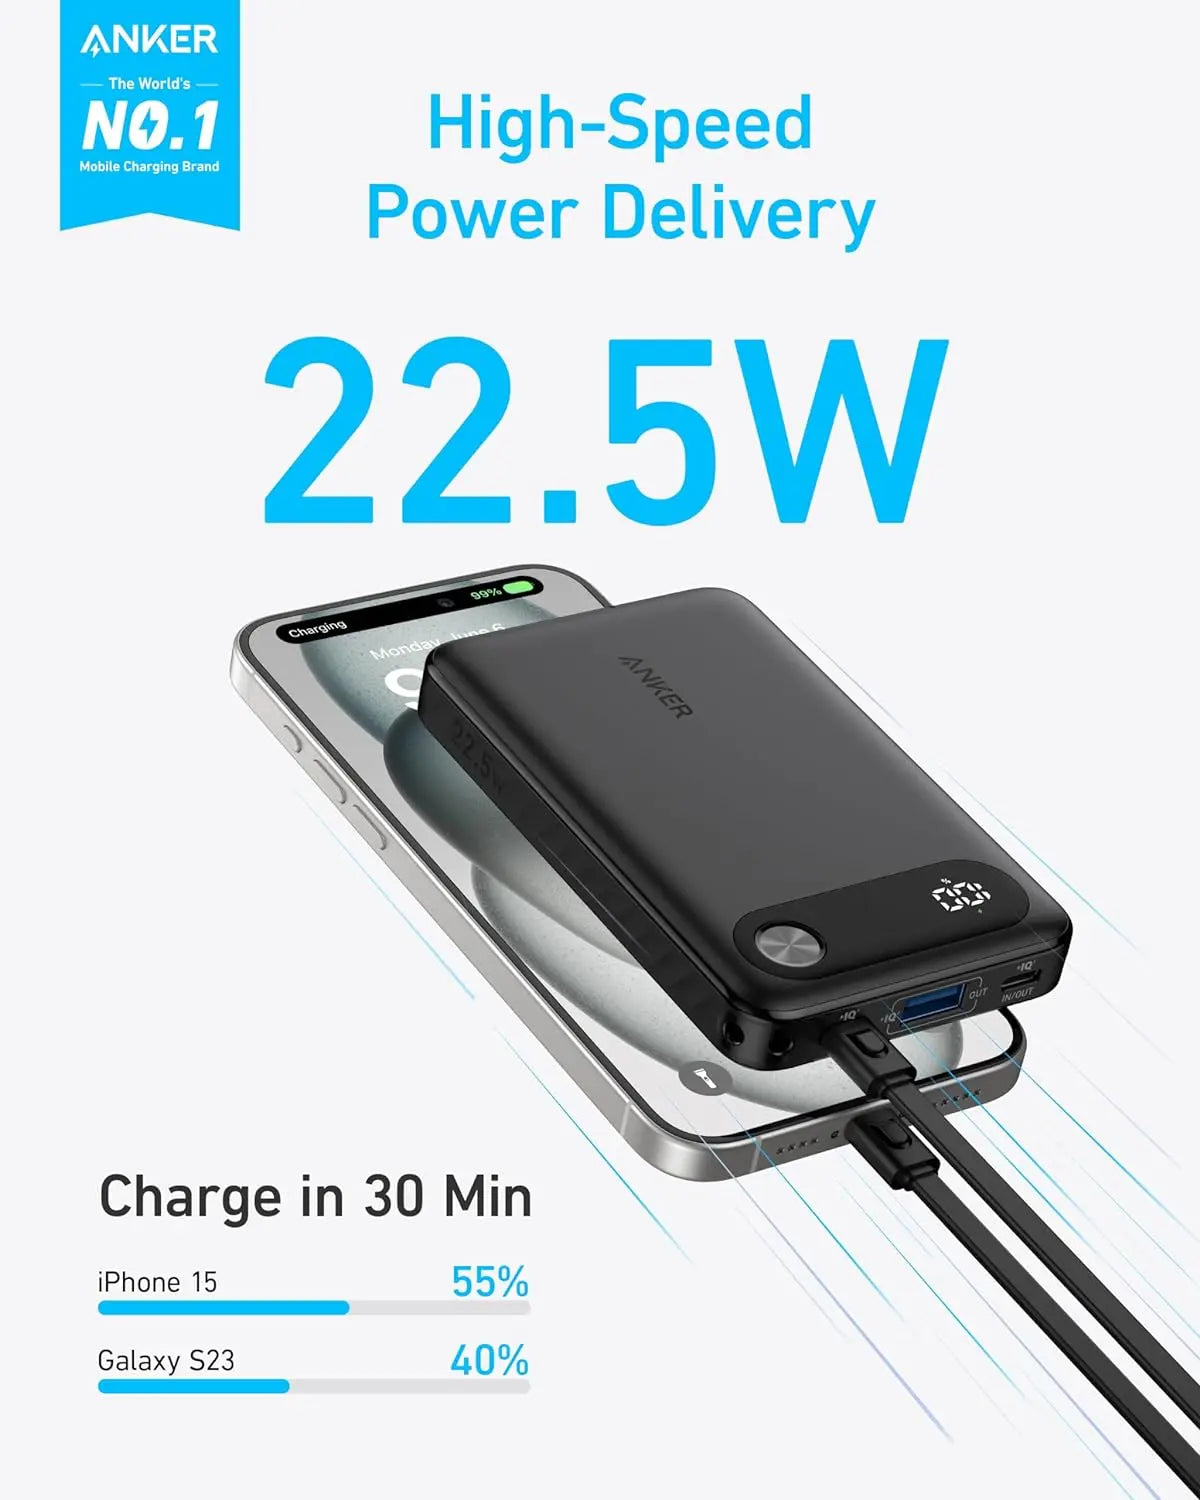 Anker Powercore PowerBank 10,000mAh Portable Charger Built-in USB-C Cable Lanyard 22.5W Max Output 2 USB-C and 1 USB-A Port Battery Pack (A1257)